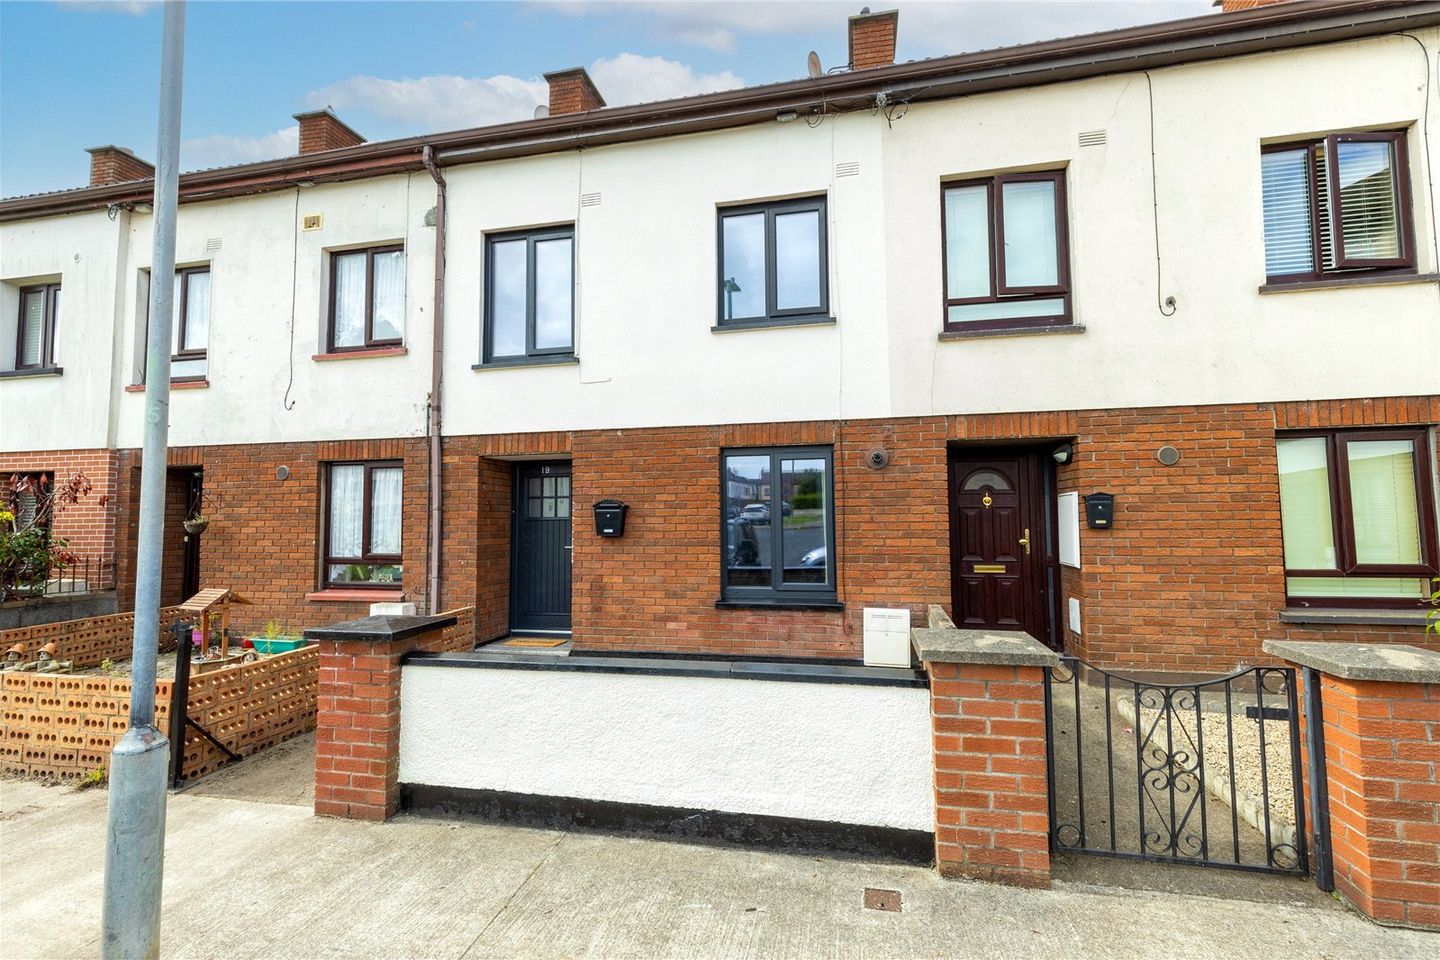 19 Oldcourt Avenue, Boghall Road, Bray, Co. Wicklow, A98AE06